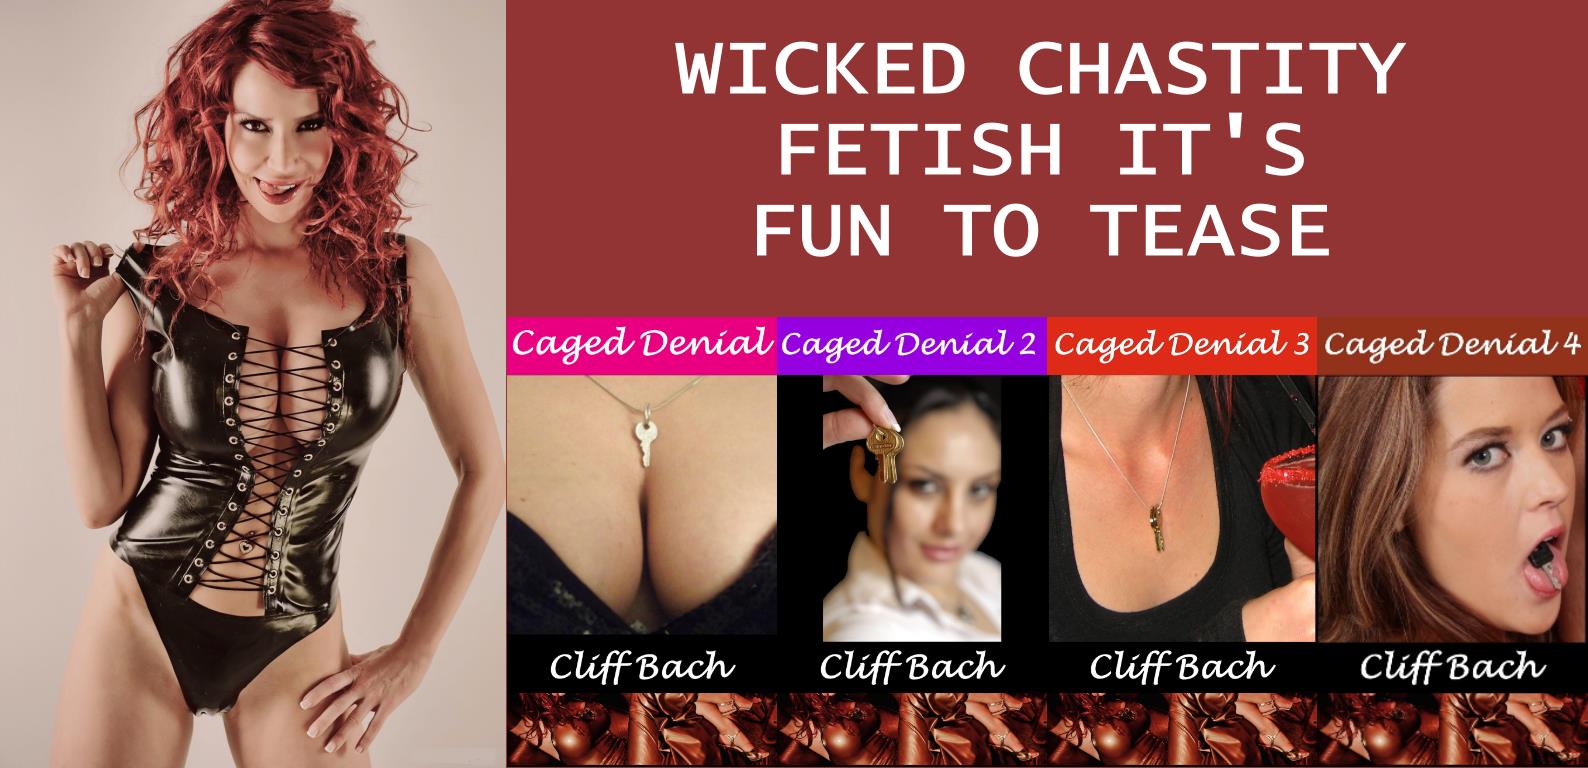 Wicked Chastity Fetish It's Fun To Tease